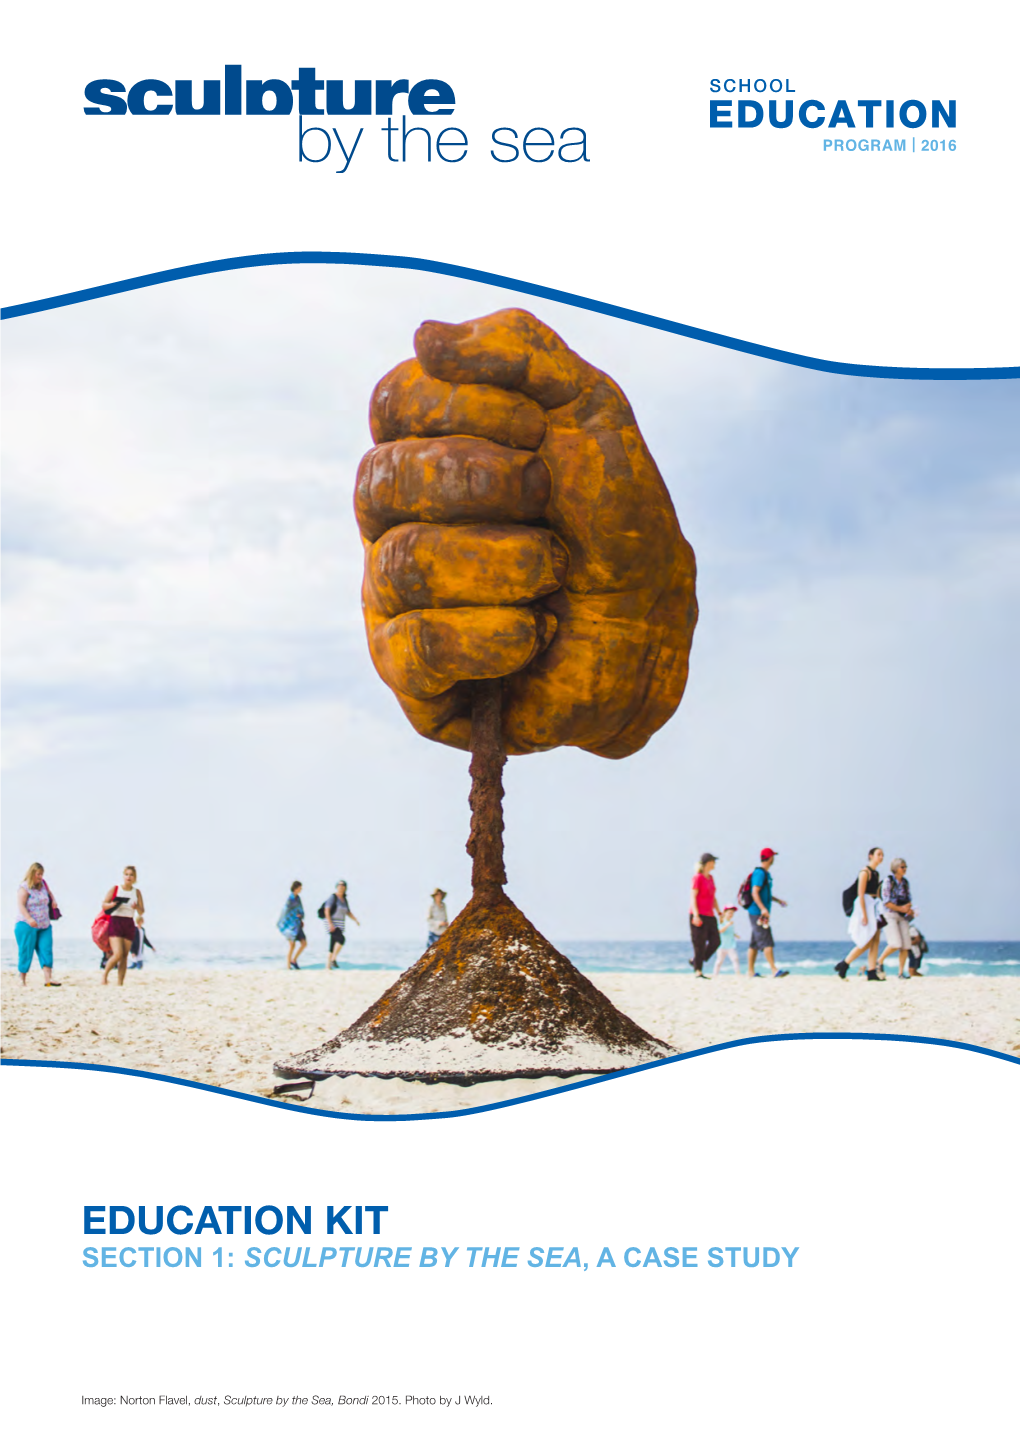 Education Kit Section 1: Sculpture by the Sea, a Case Study